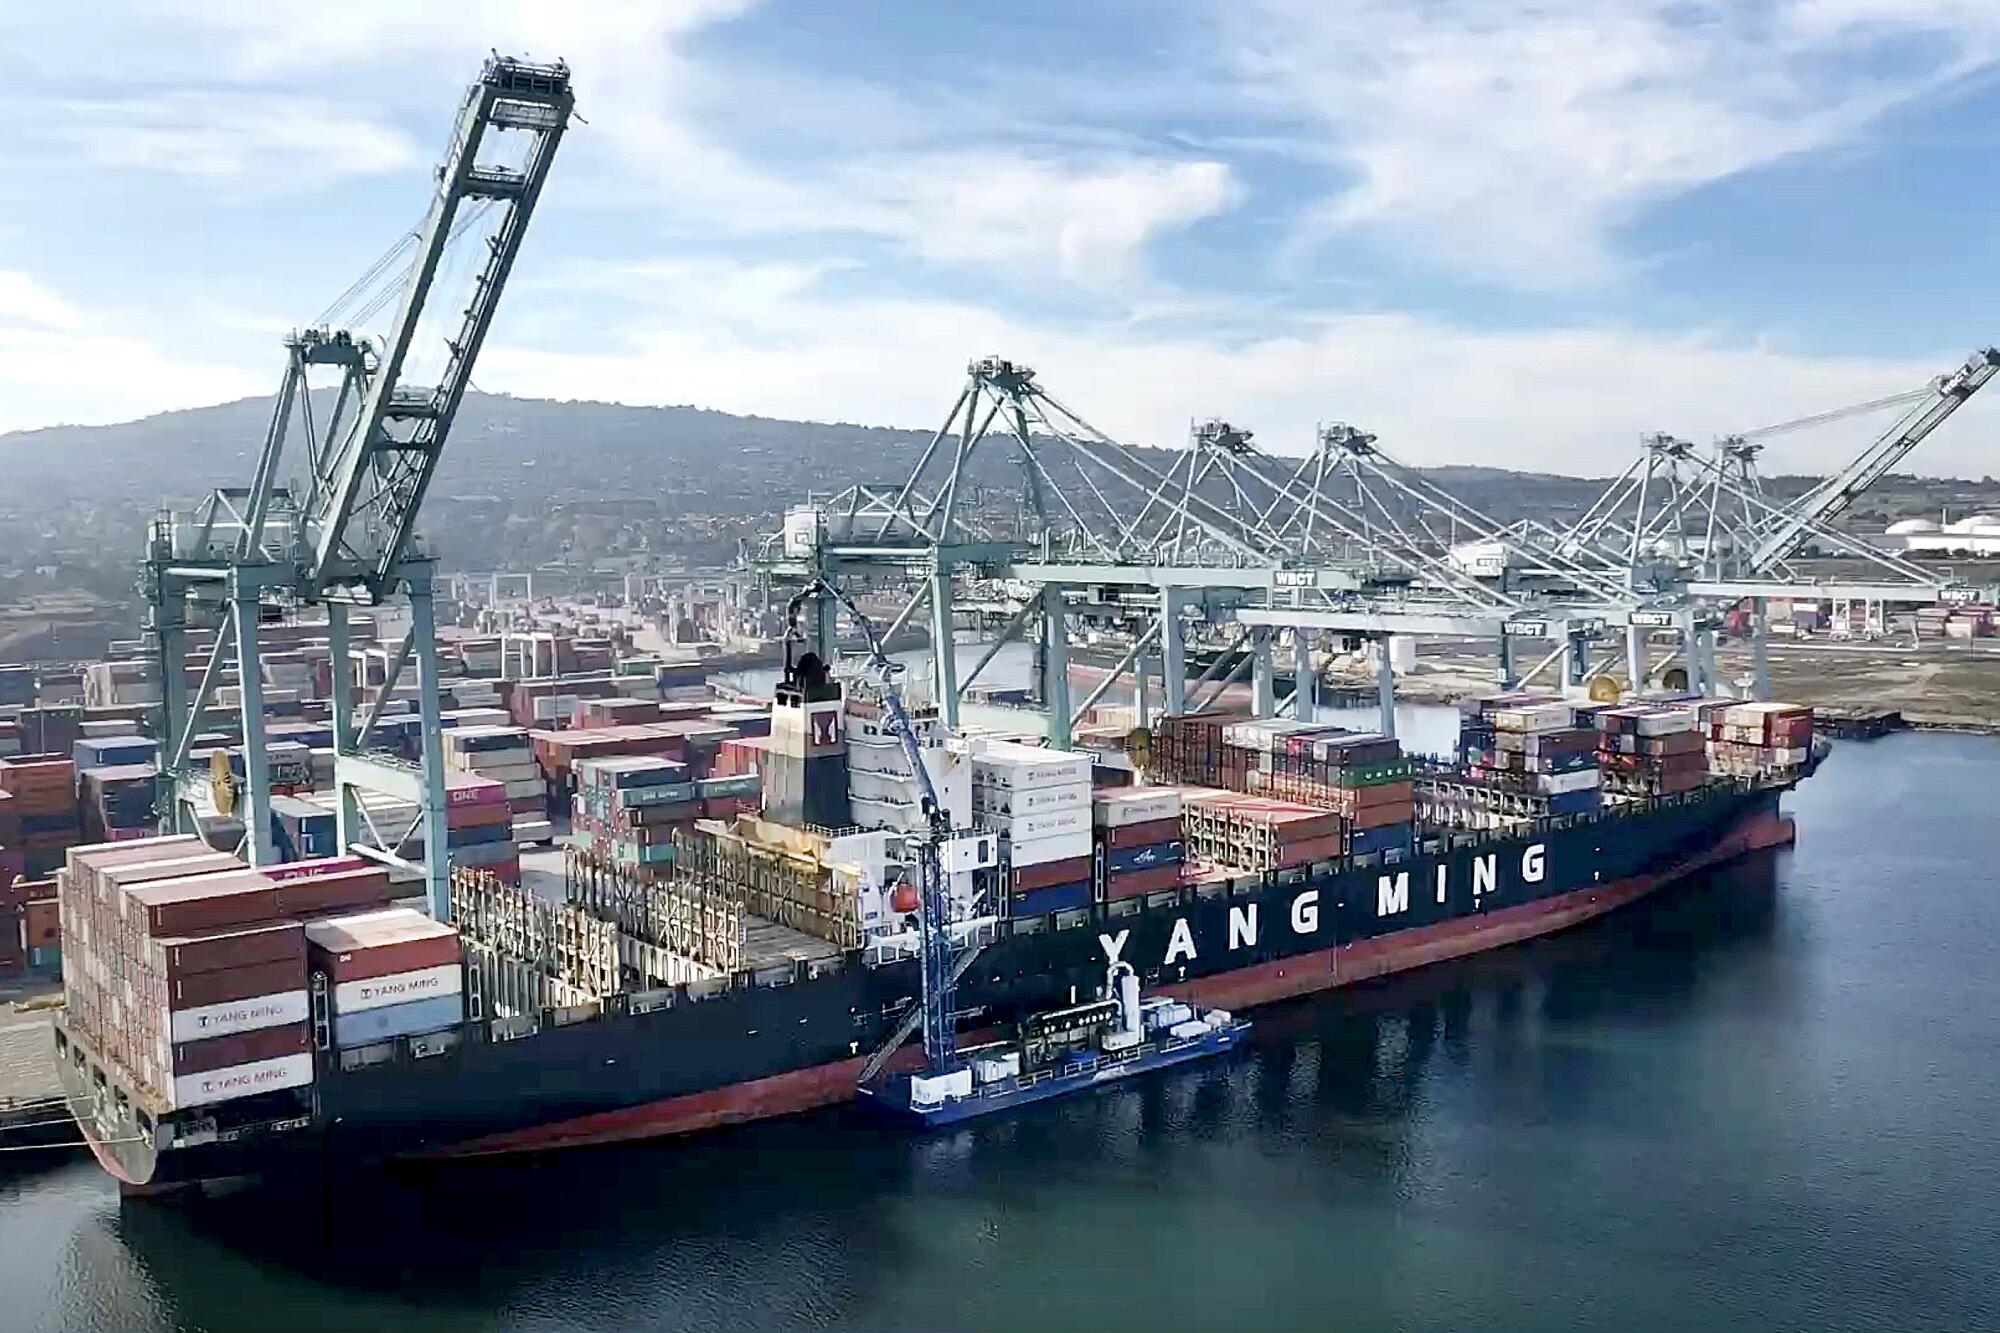 An aerial view of a container ship being unloaded at a port facility.